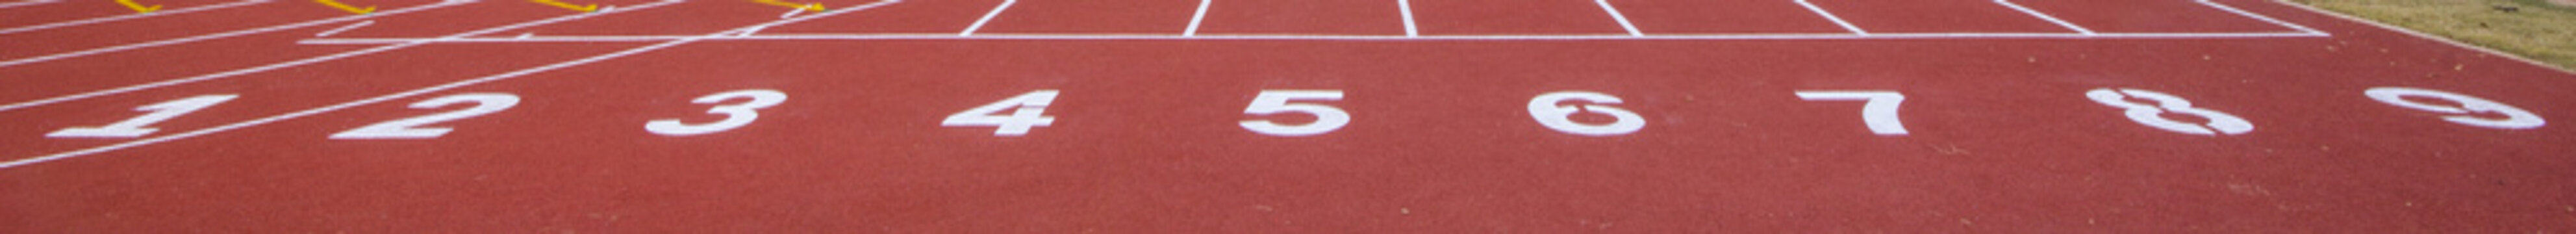 Start track. line on a red running track